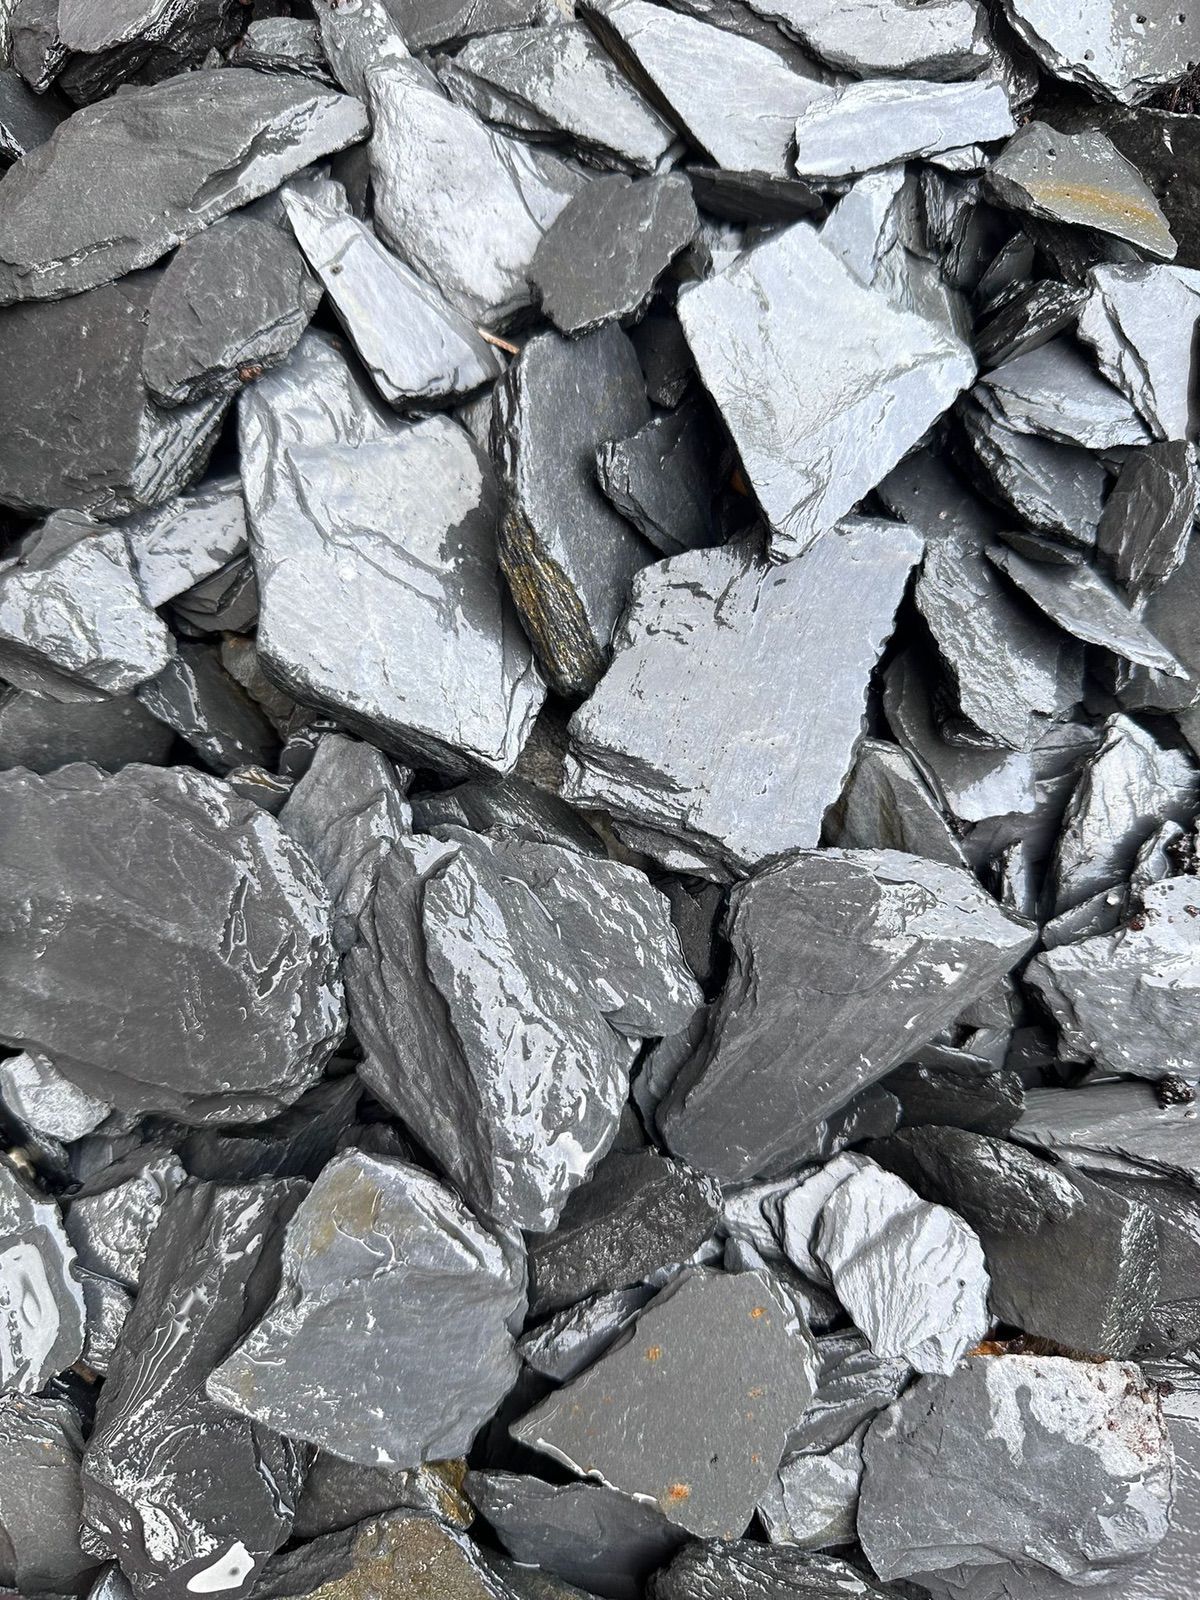 A pile of gray and silver rocks.